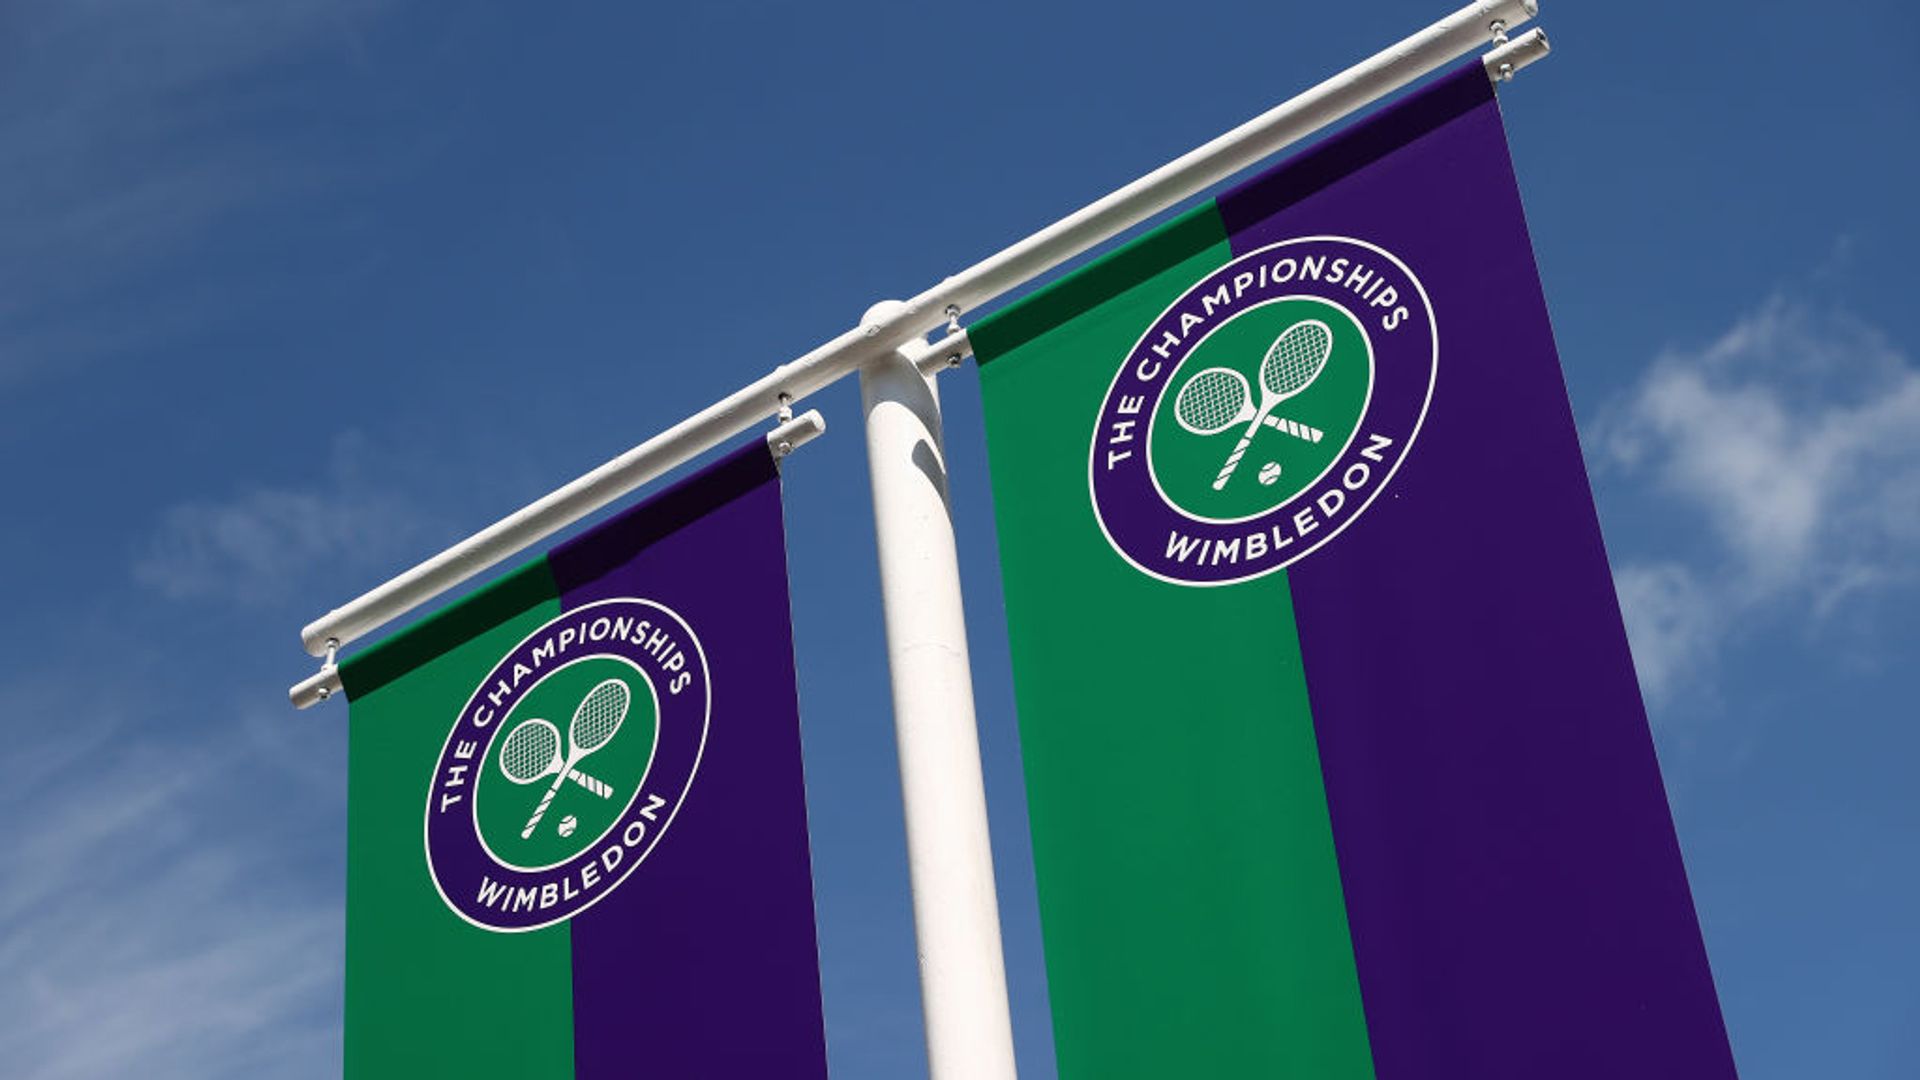 Views outside the grounds ahead of The Championships - Wimbledon 2021